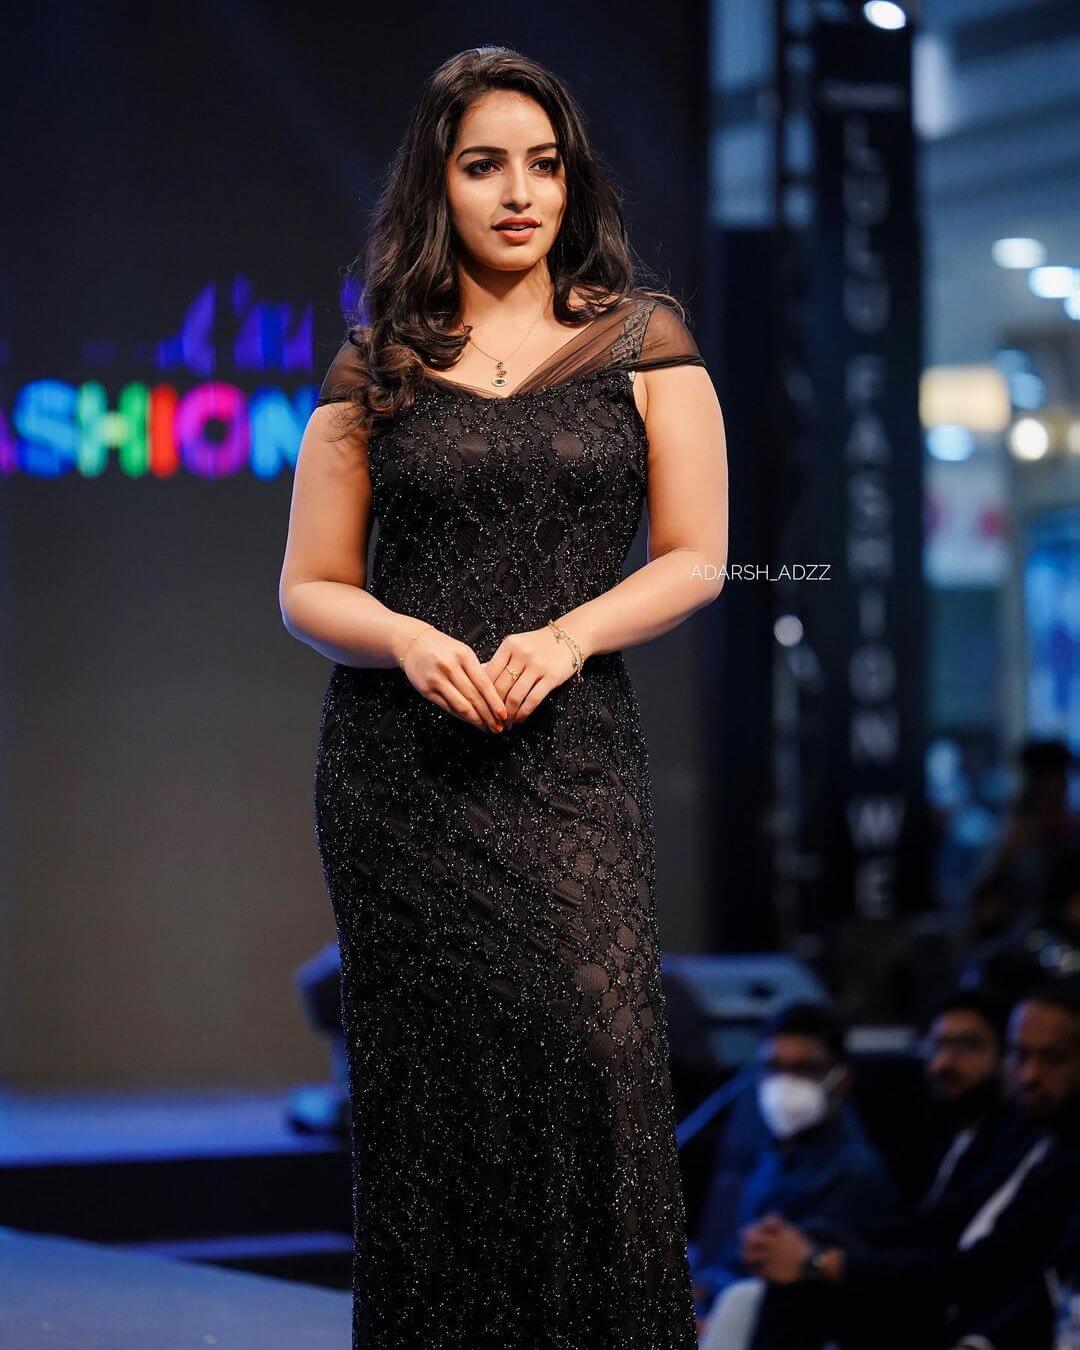 Malavika Menon Set Stage On Fire In Her Black Glittery Embellished Bodycon Gown